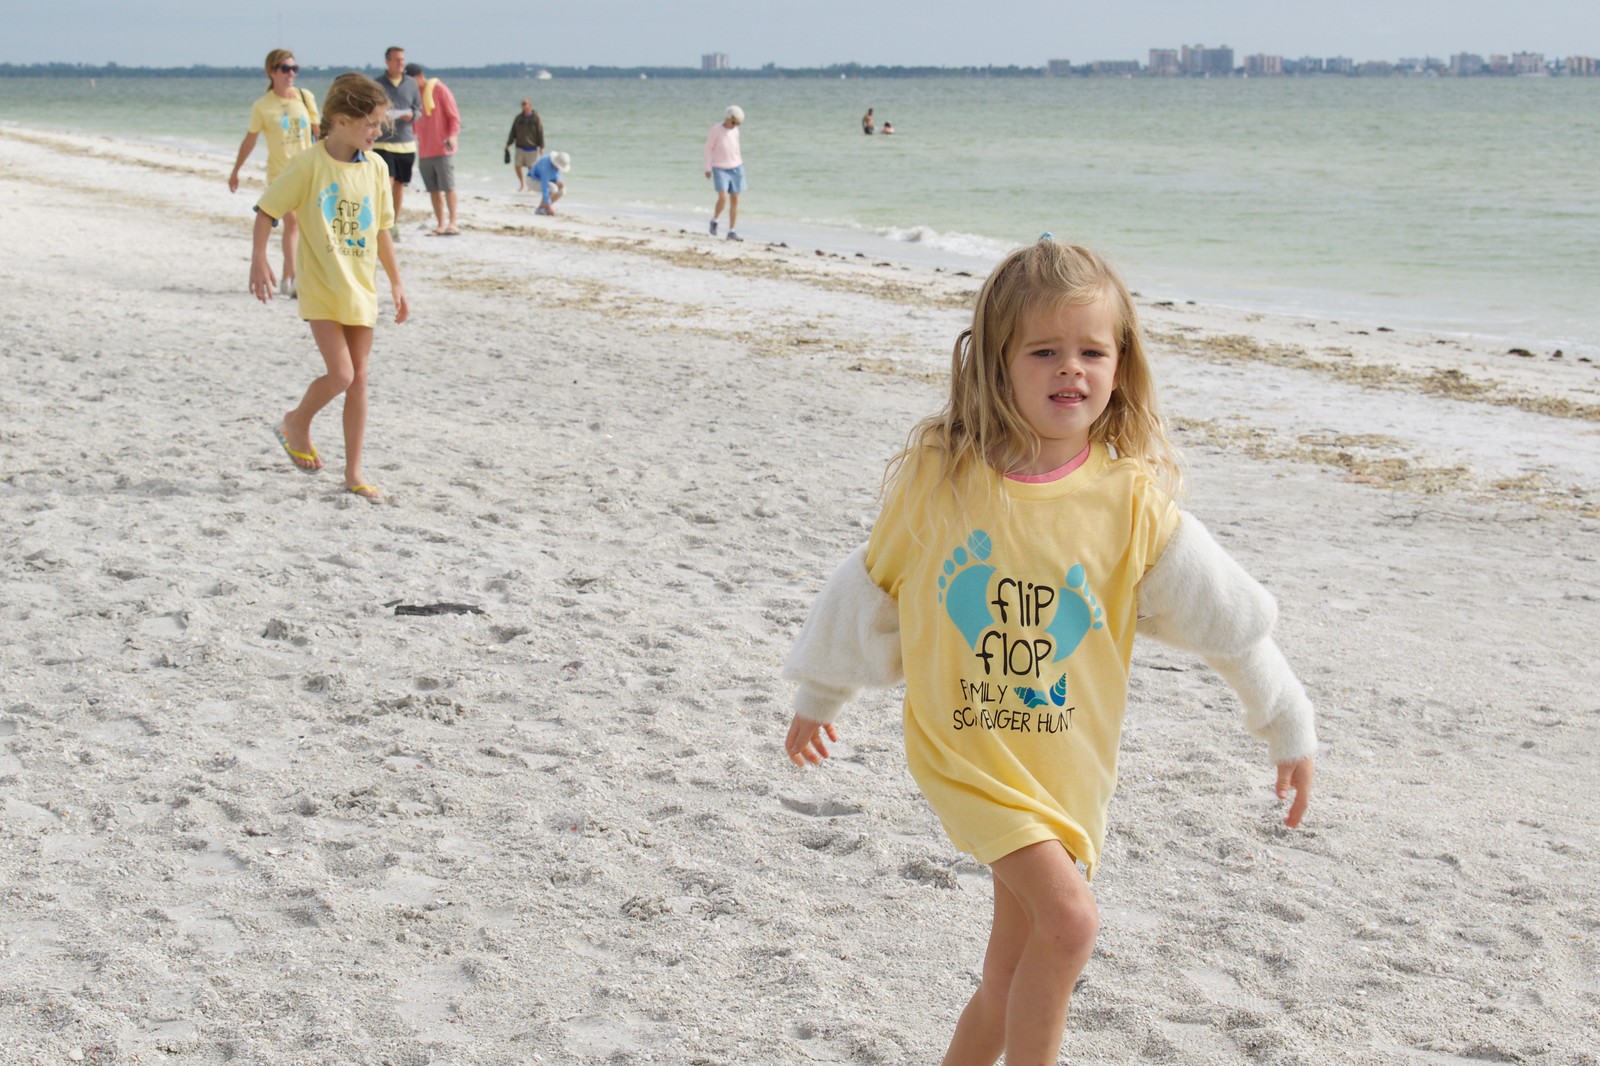 Kate and On Island helped Sanibel Sea School produce a special edition t-shirt for the first annual Flip Flop Family Scavenger Hunt in 2018.